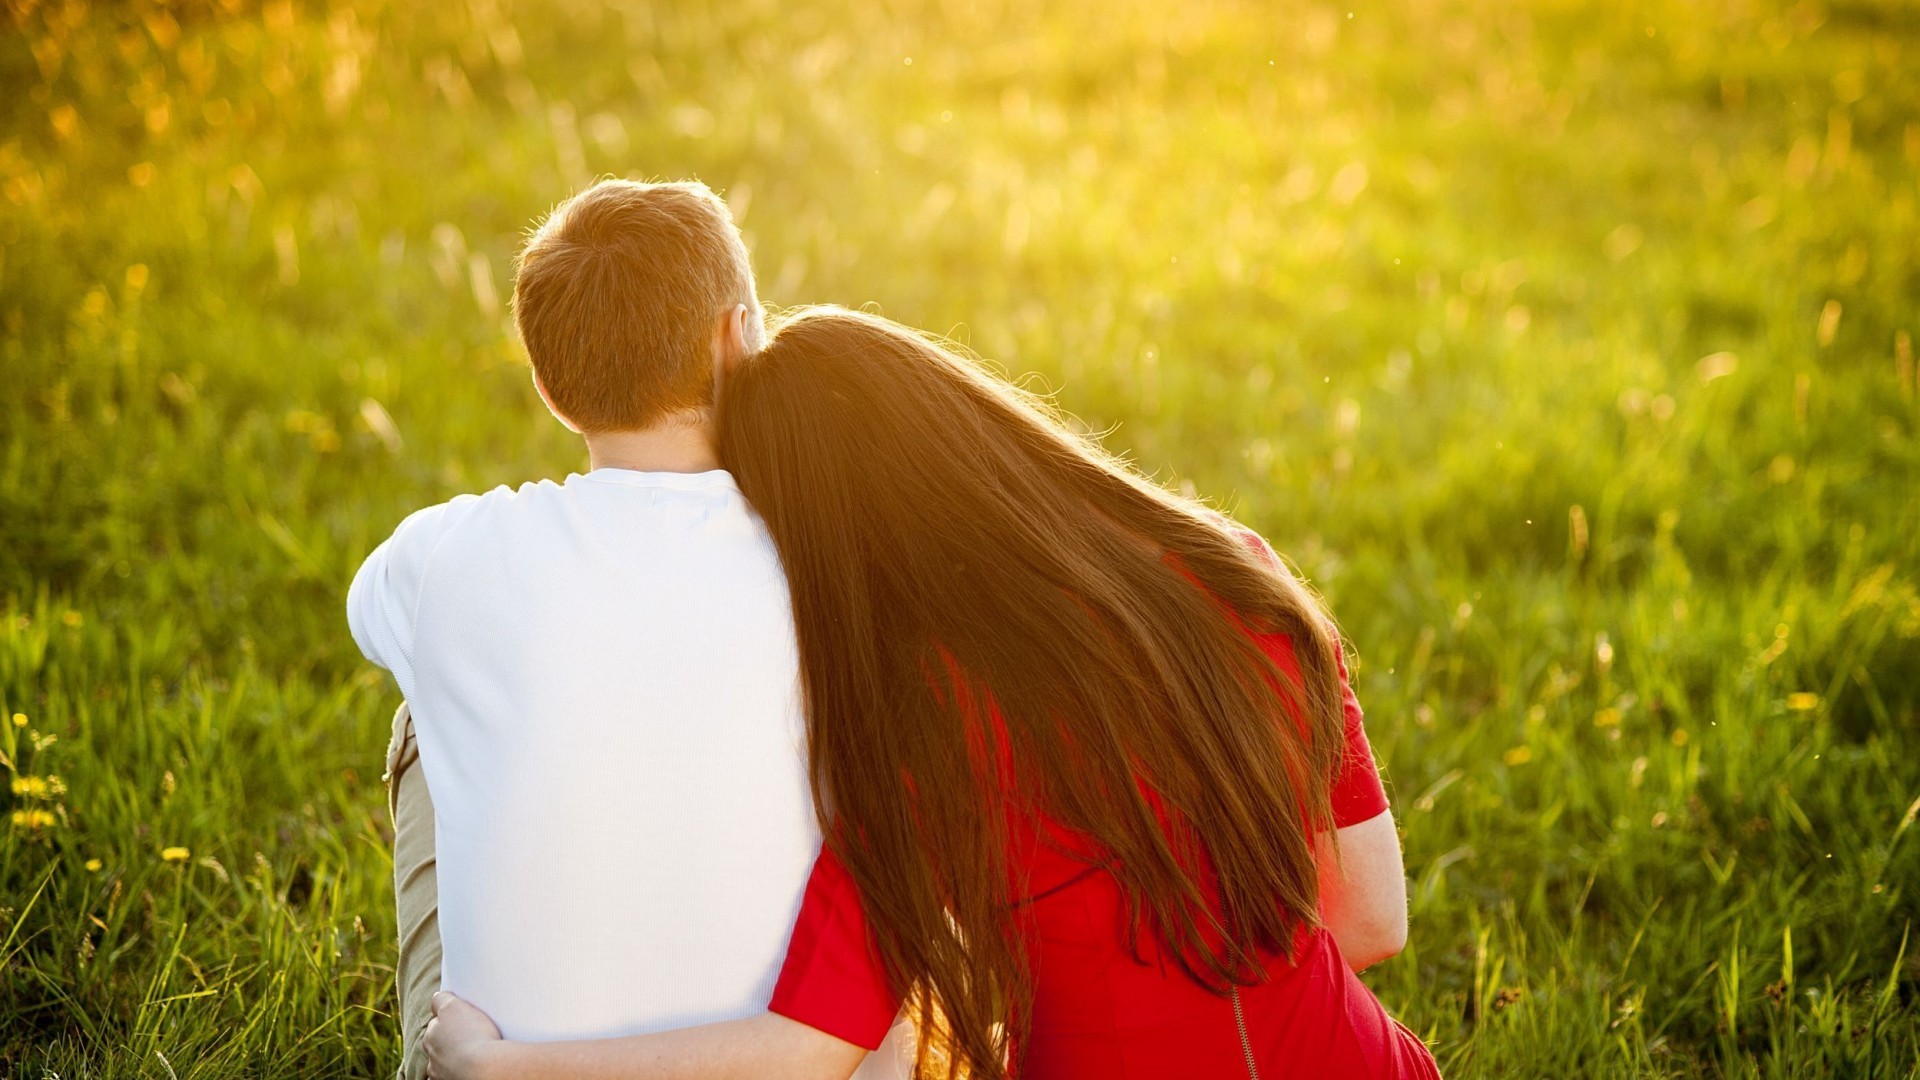 6 Spiritual reasons that prevent marriages